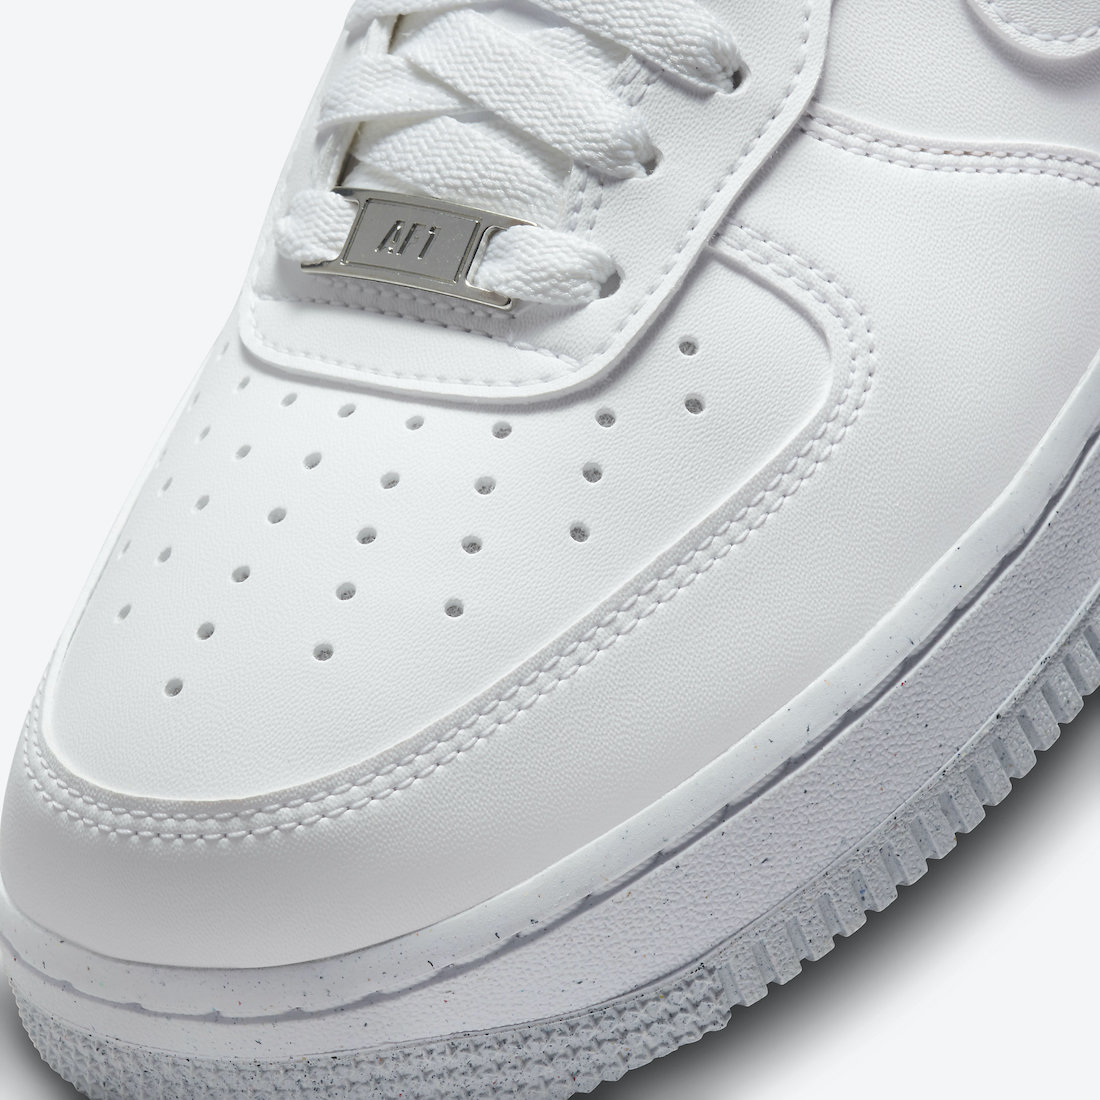 Nike Air Force 1 Low White DC9486-101 Release Date